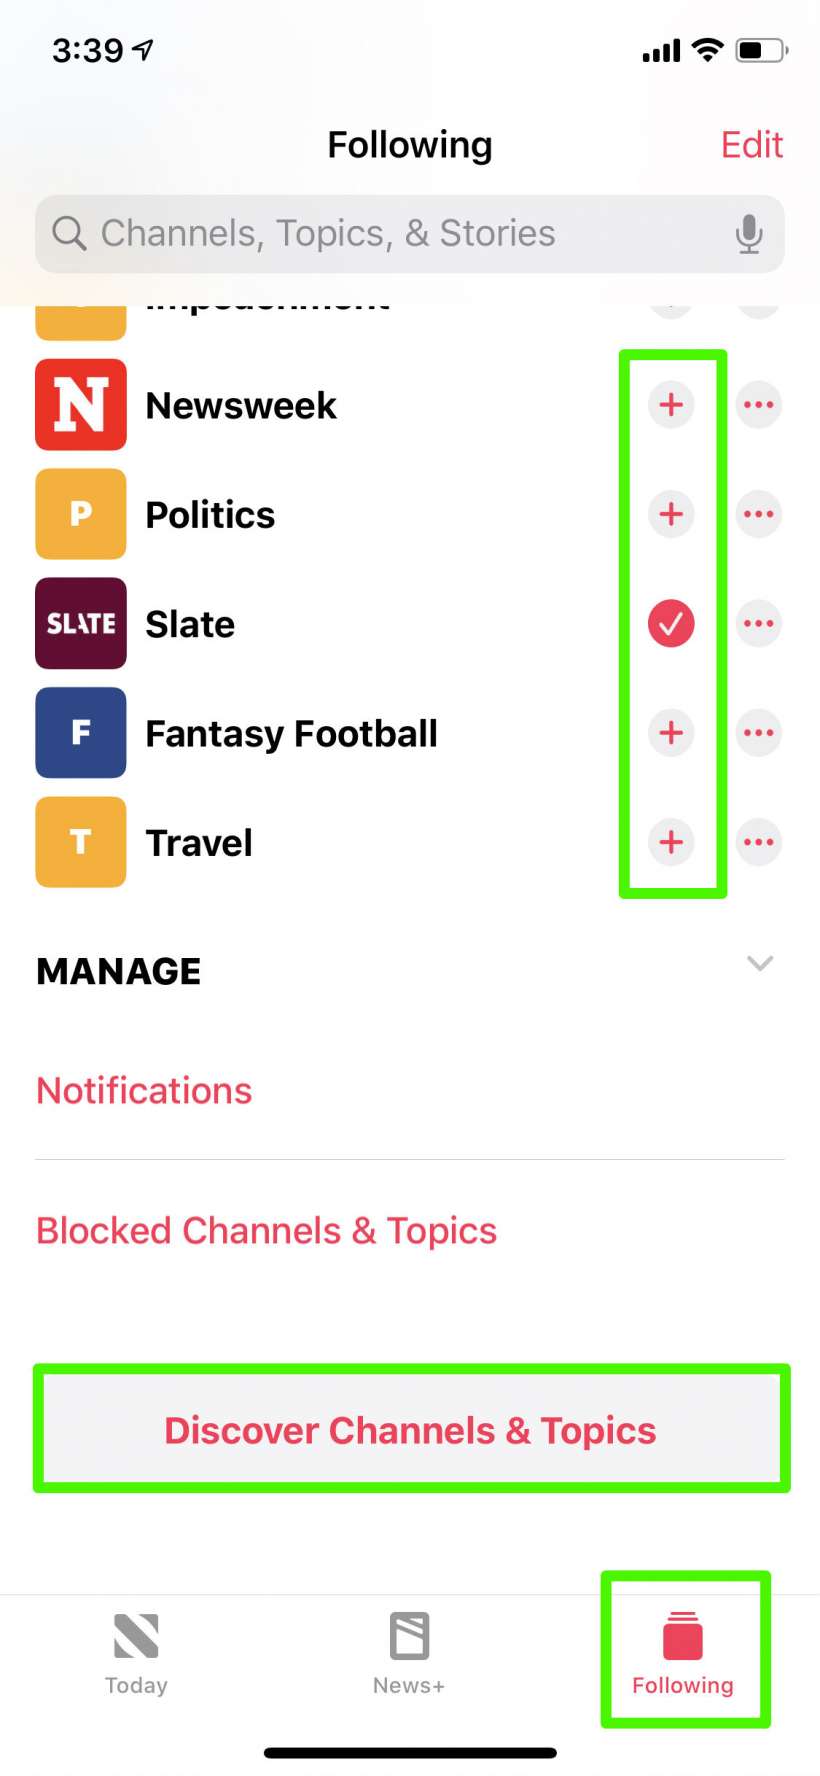 How to add channels to your Apple News feed on iPhone and iPad.